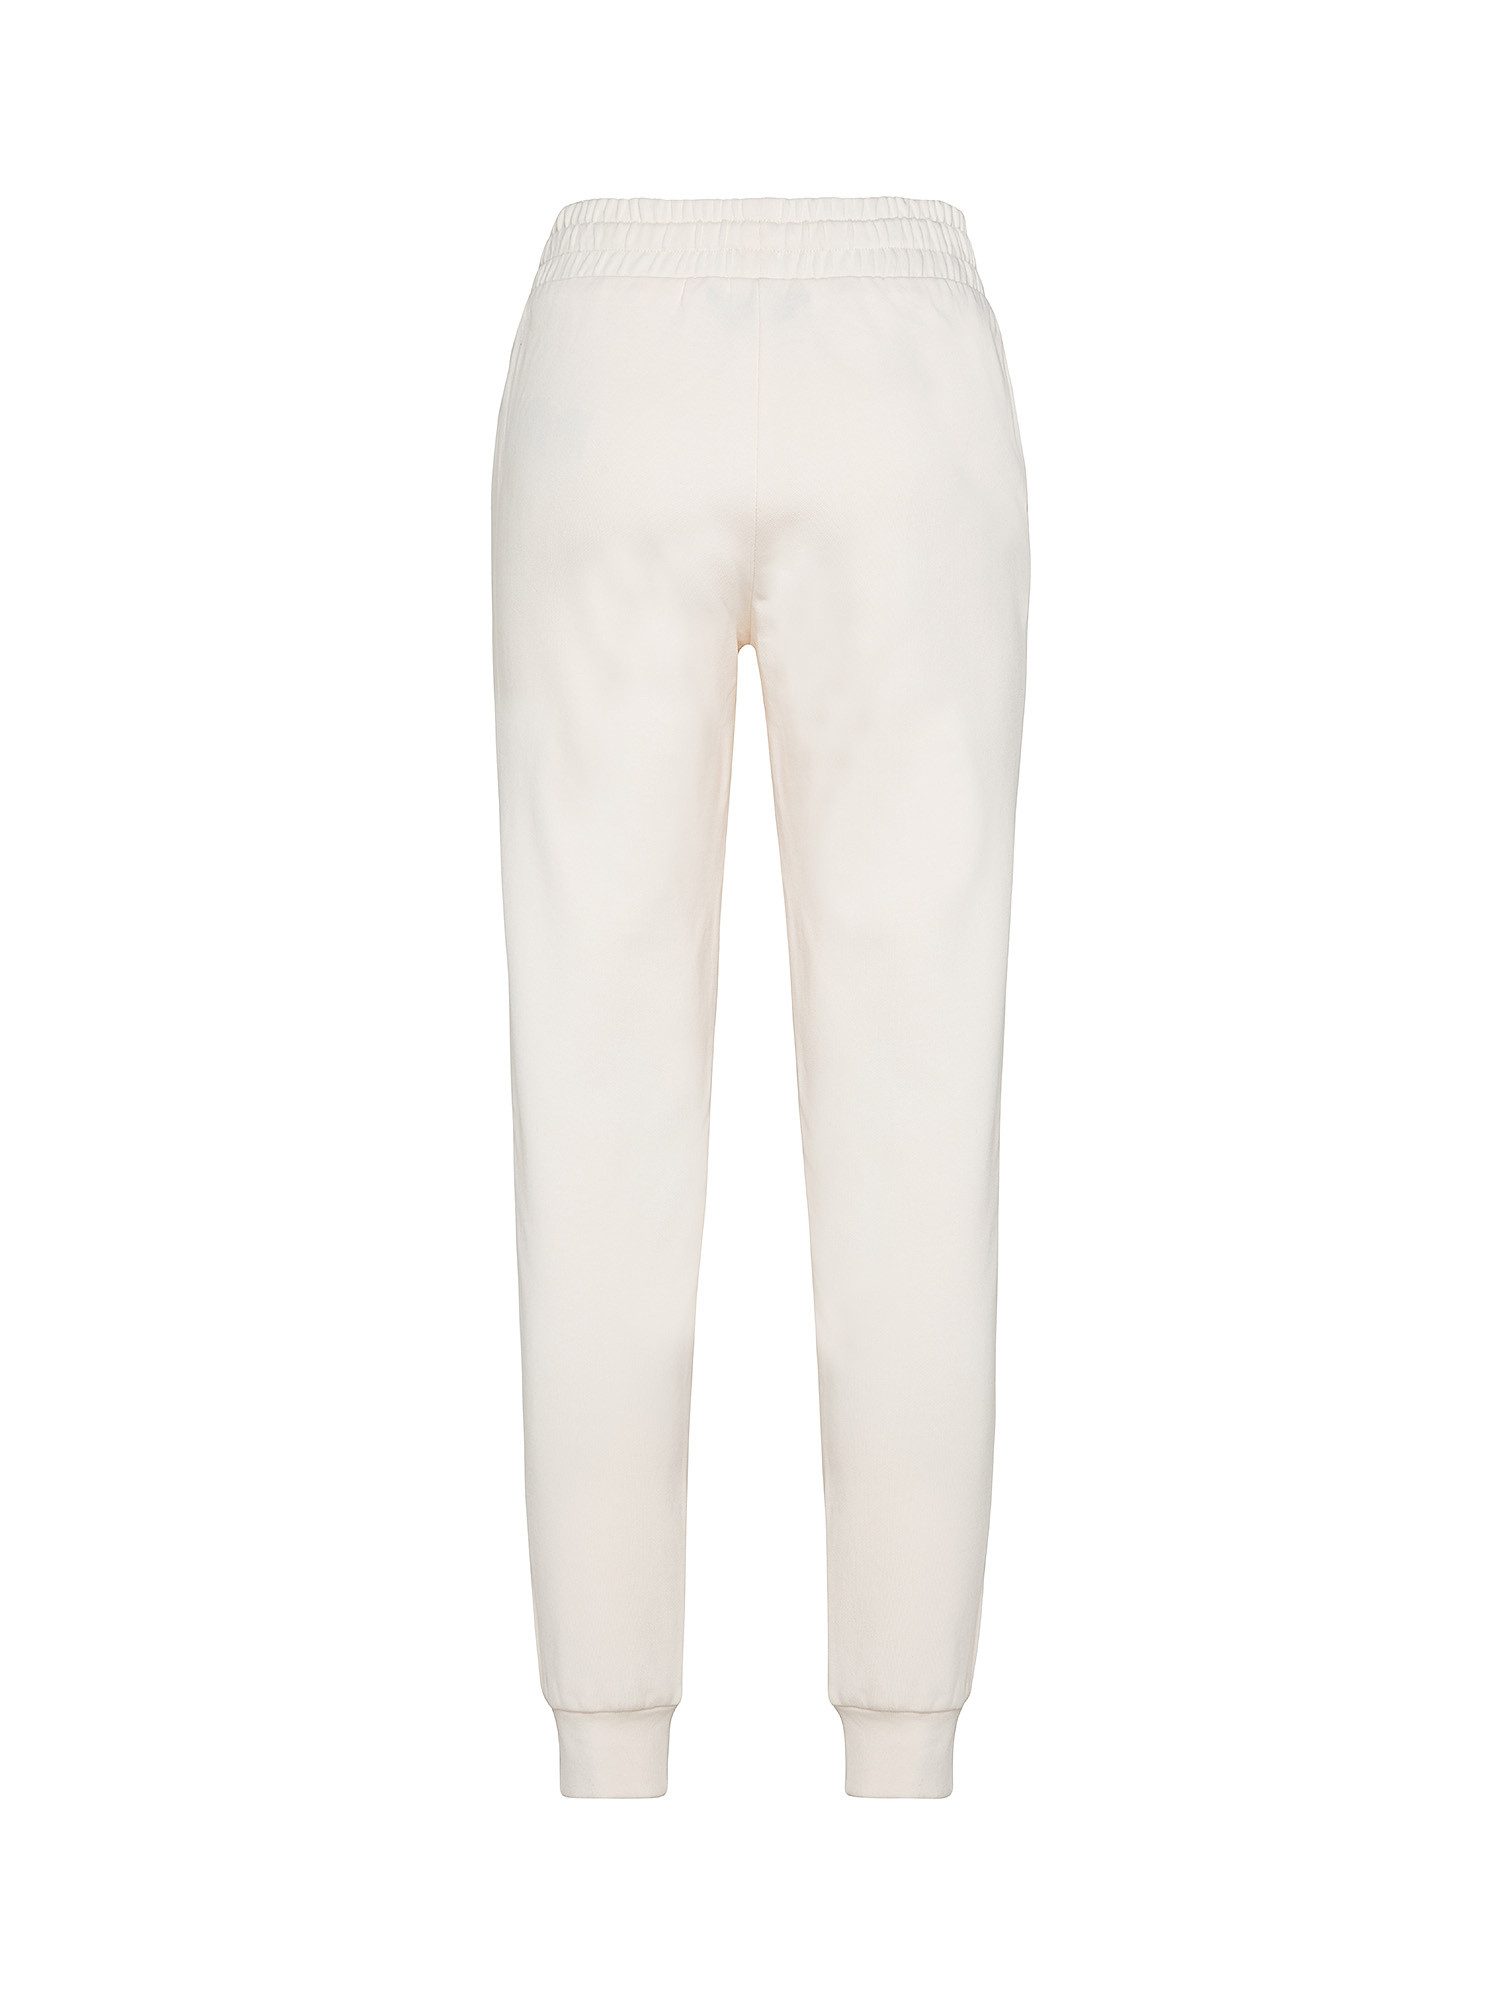 Jogger trousers with logo, Cream, large image number 1